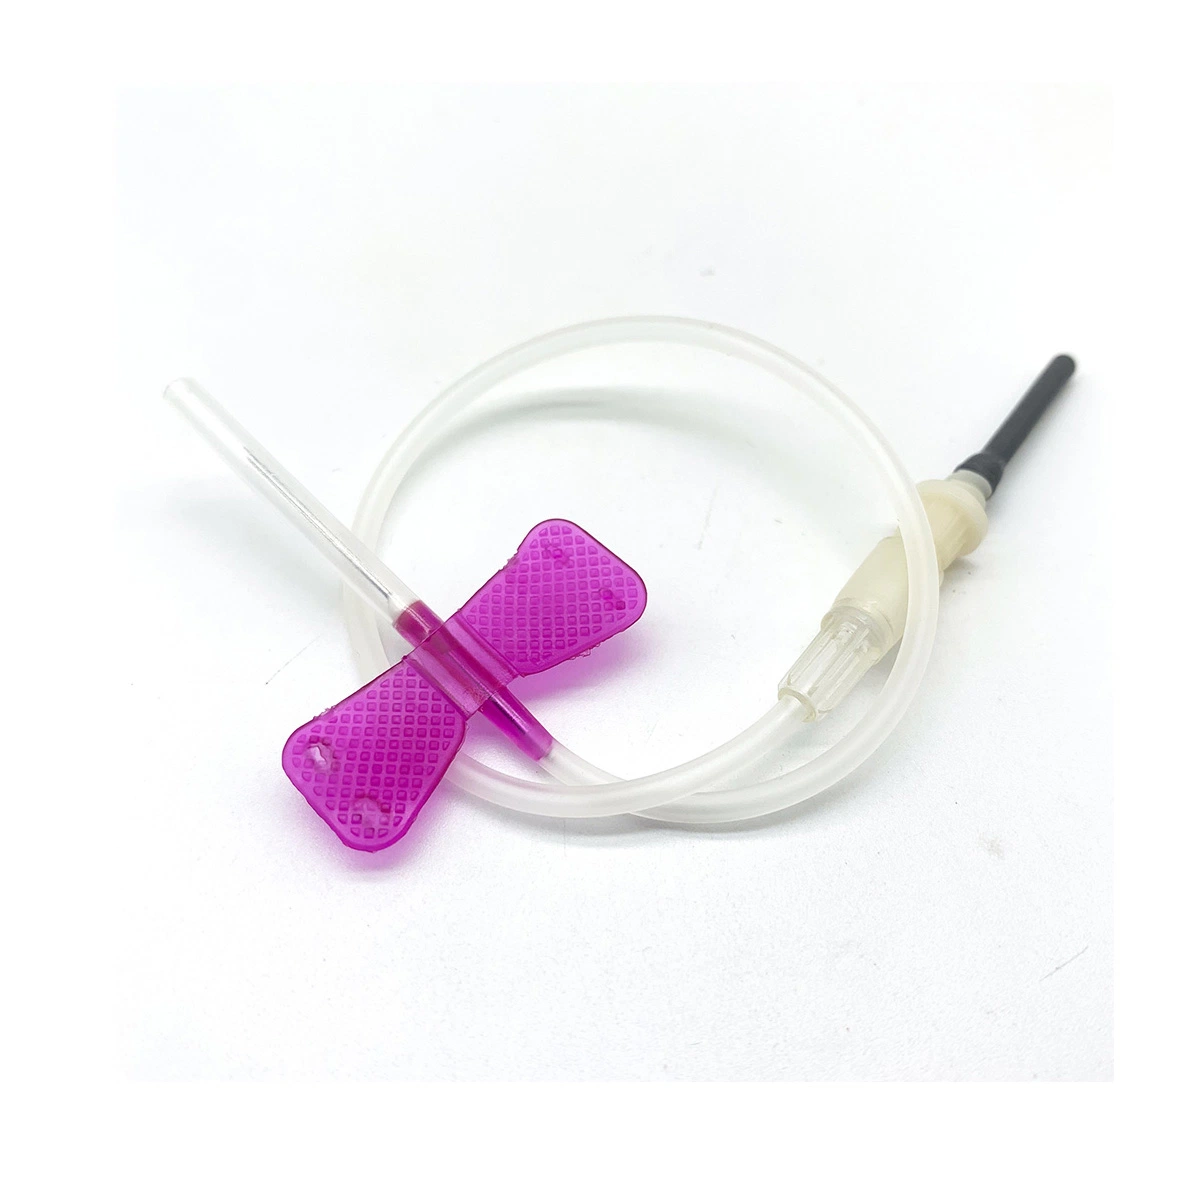 21g Vacuum Butterfly Blood Collection Needles with Luer Adapter